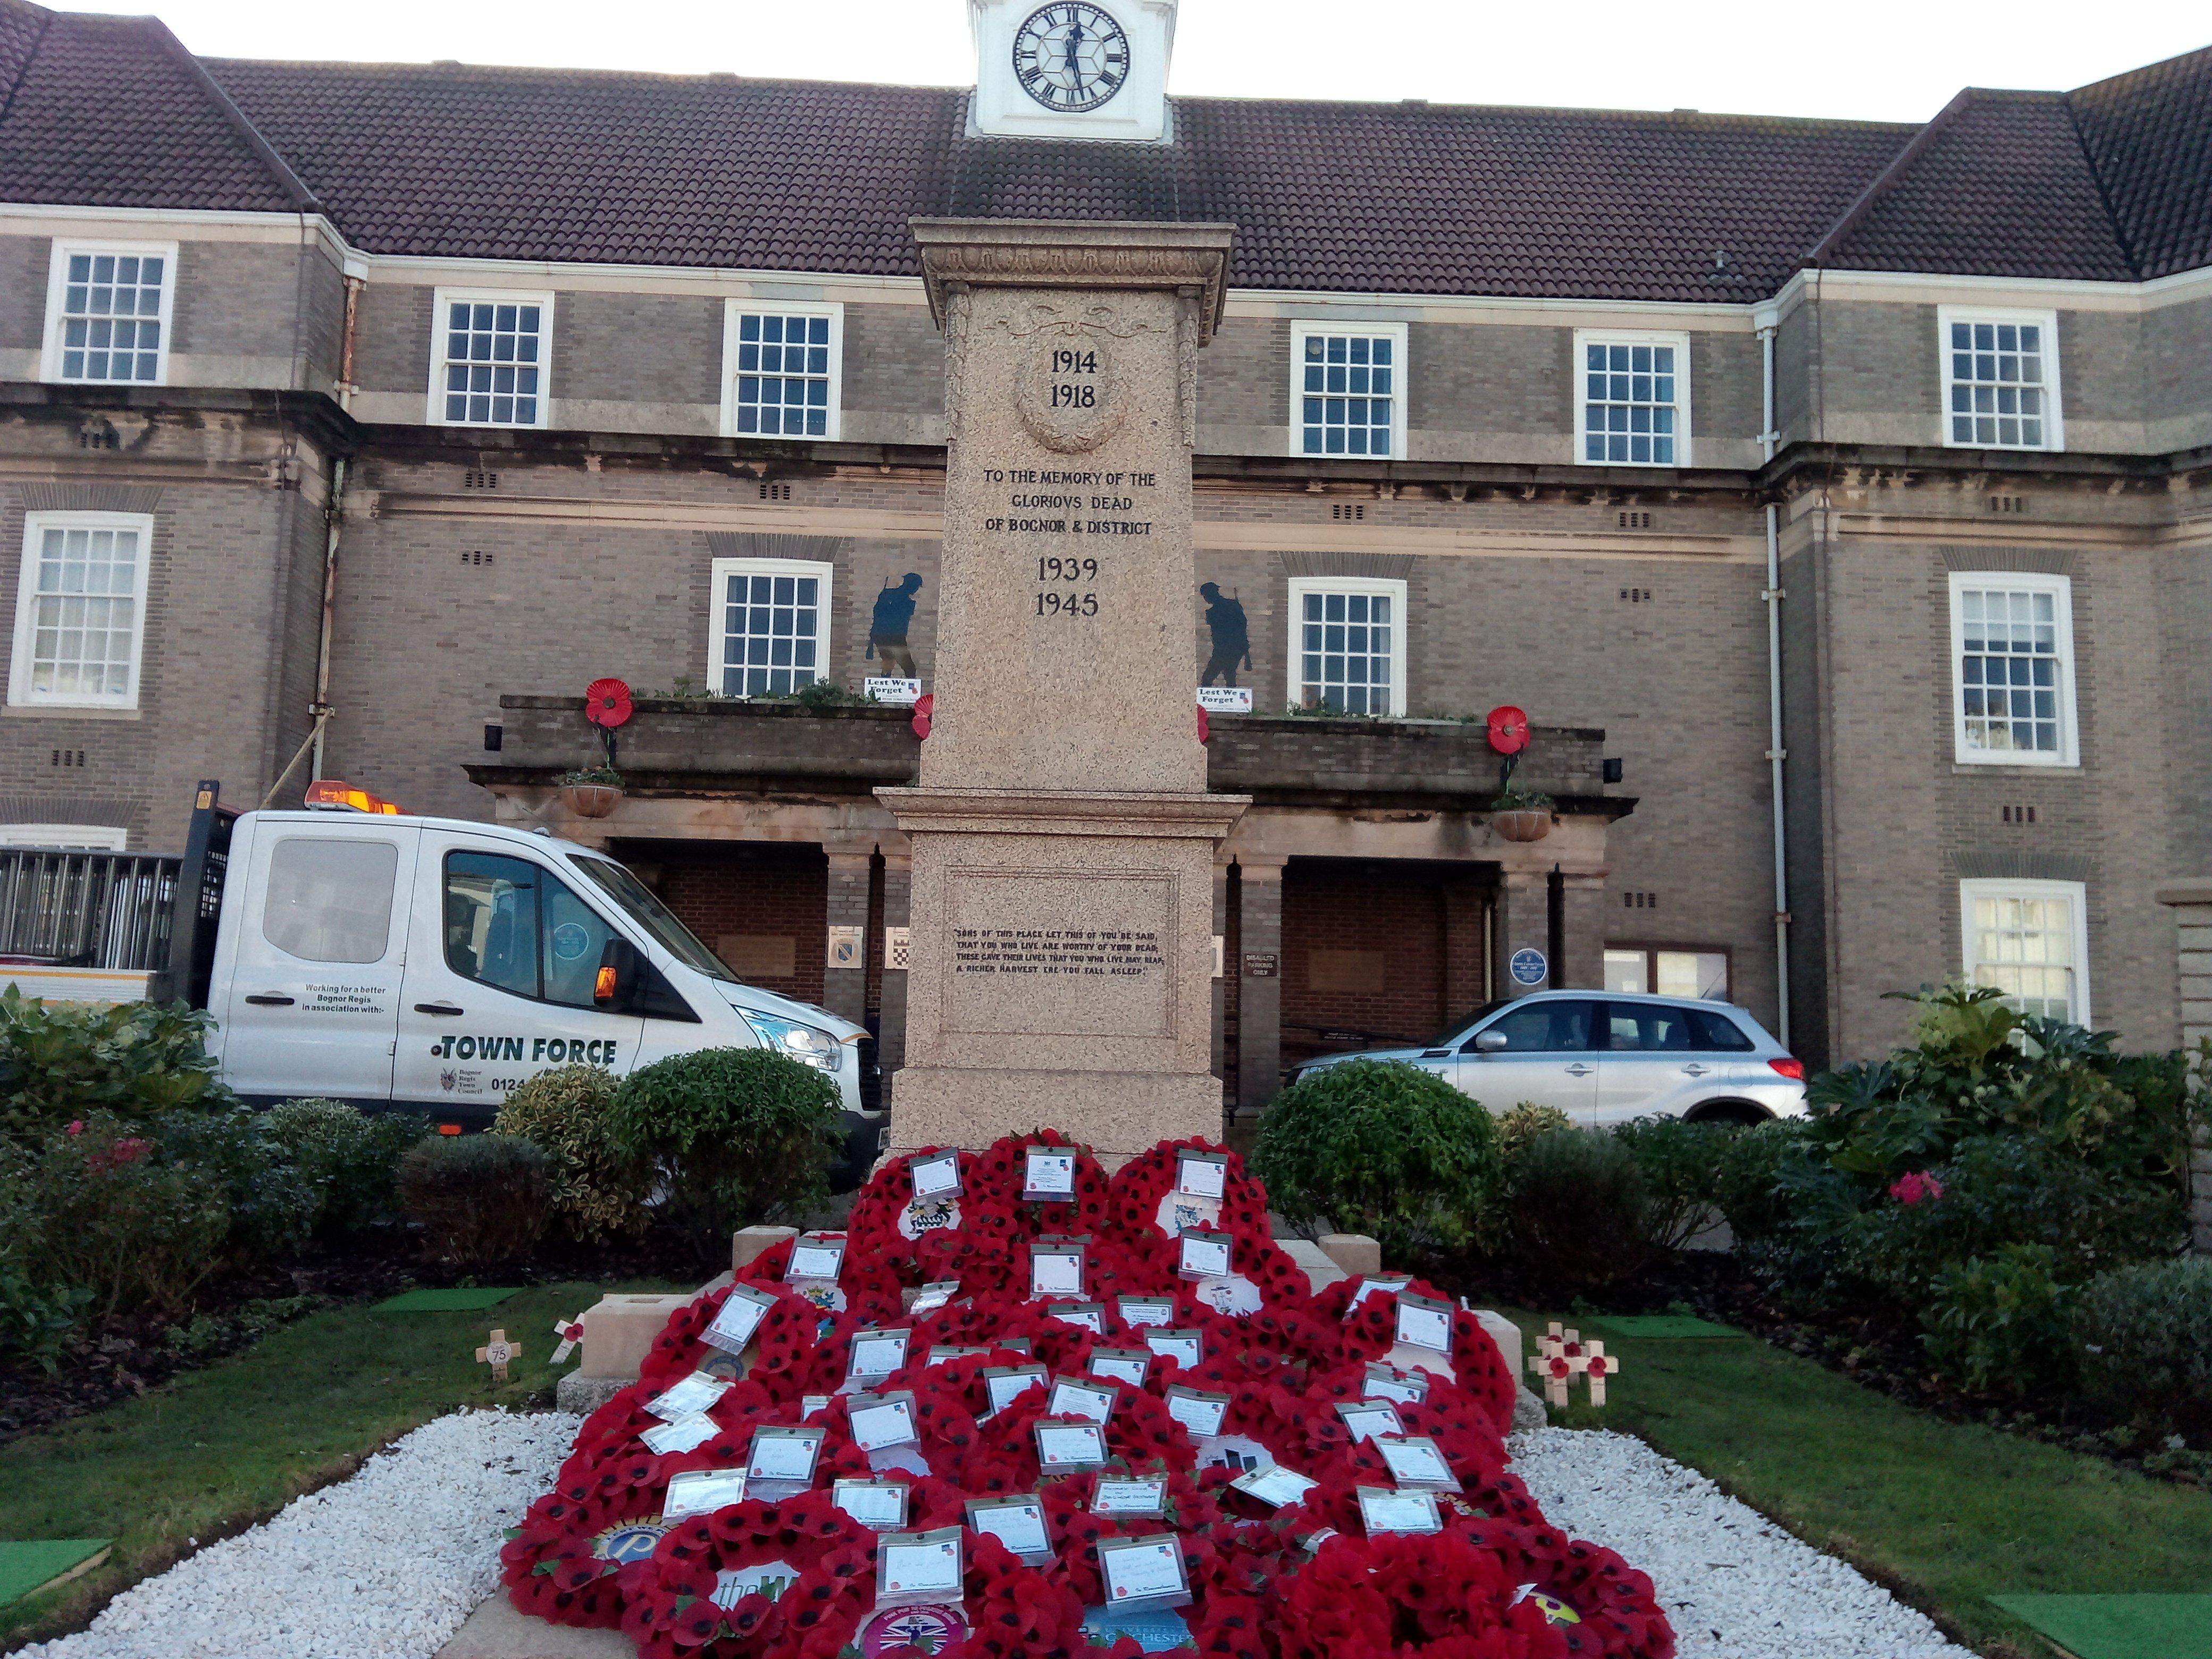 The war memorial outside the town hall